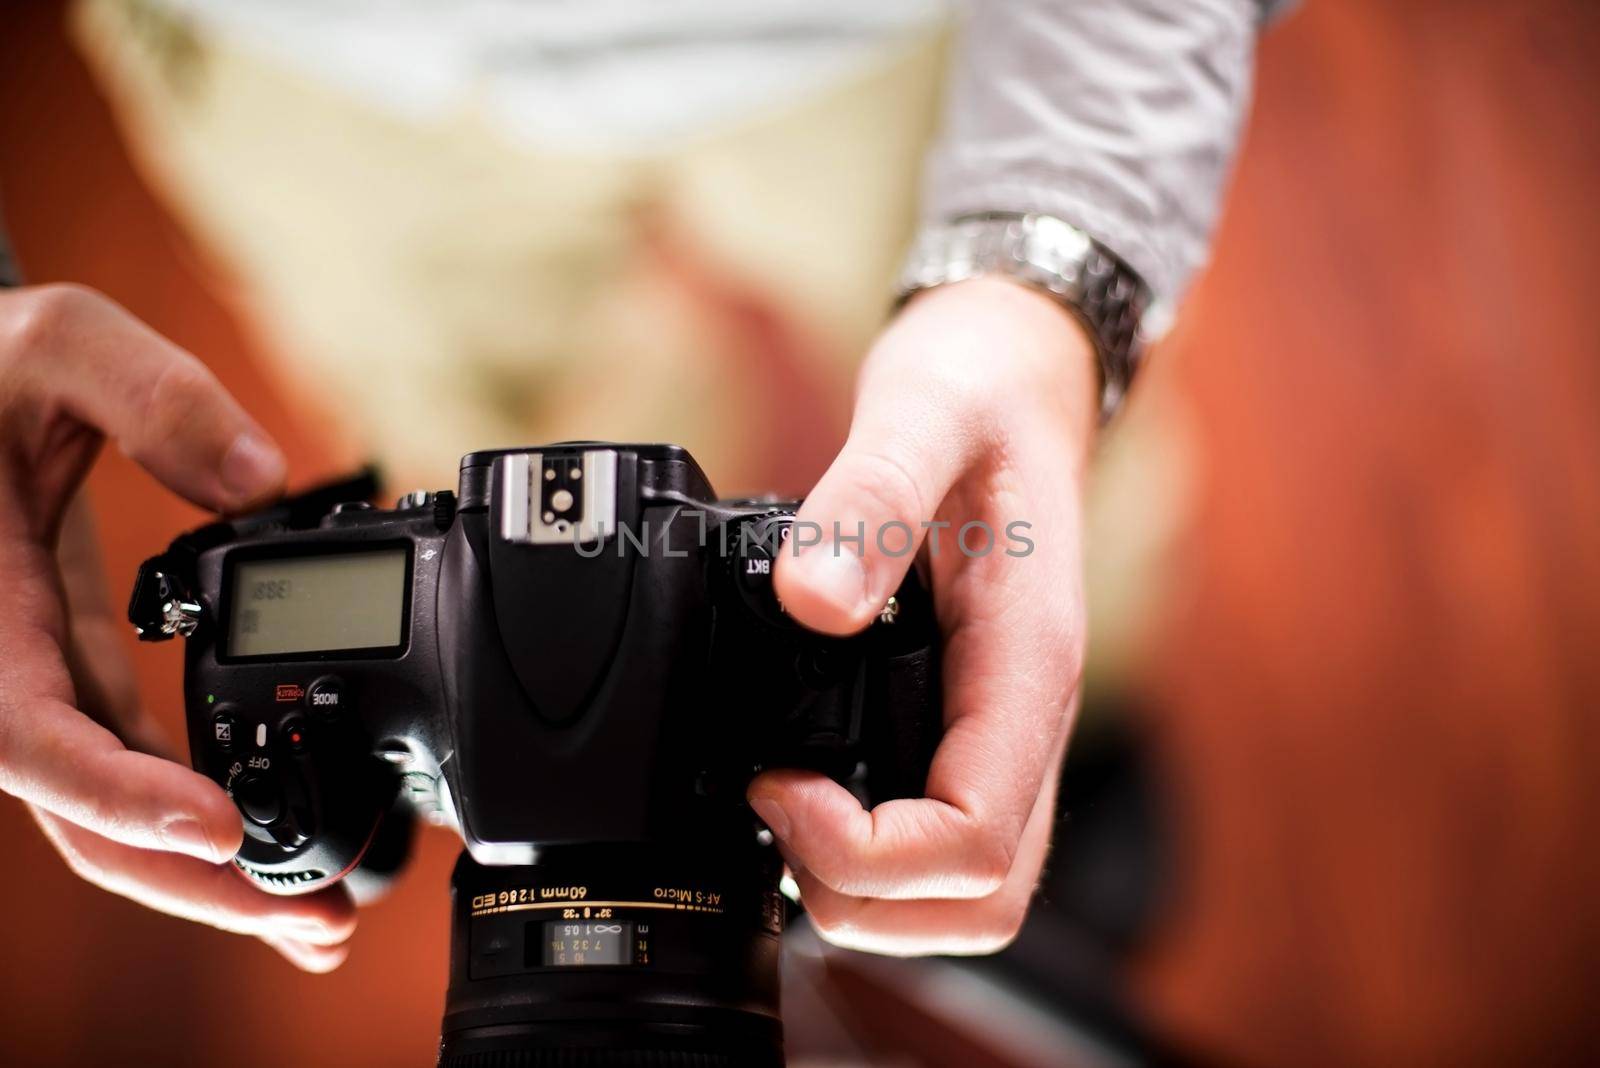 Professional Camera in Hands of Photographer. Photography Theme. Top View - Male Hands. Technology Photo Collection.